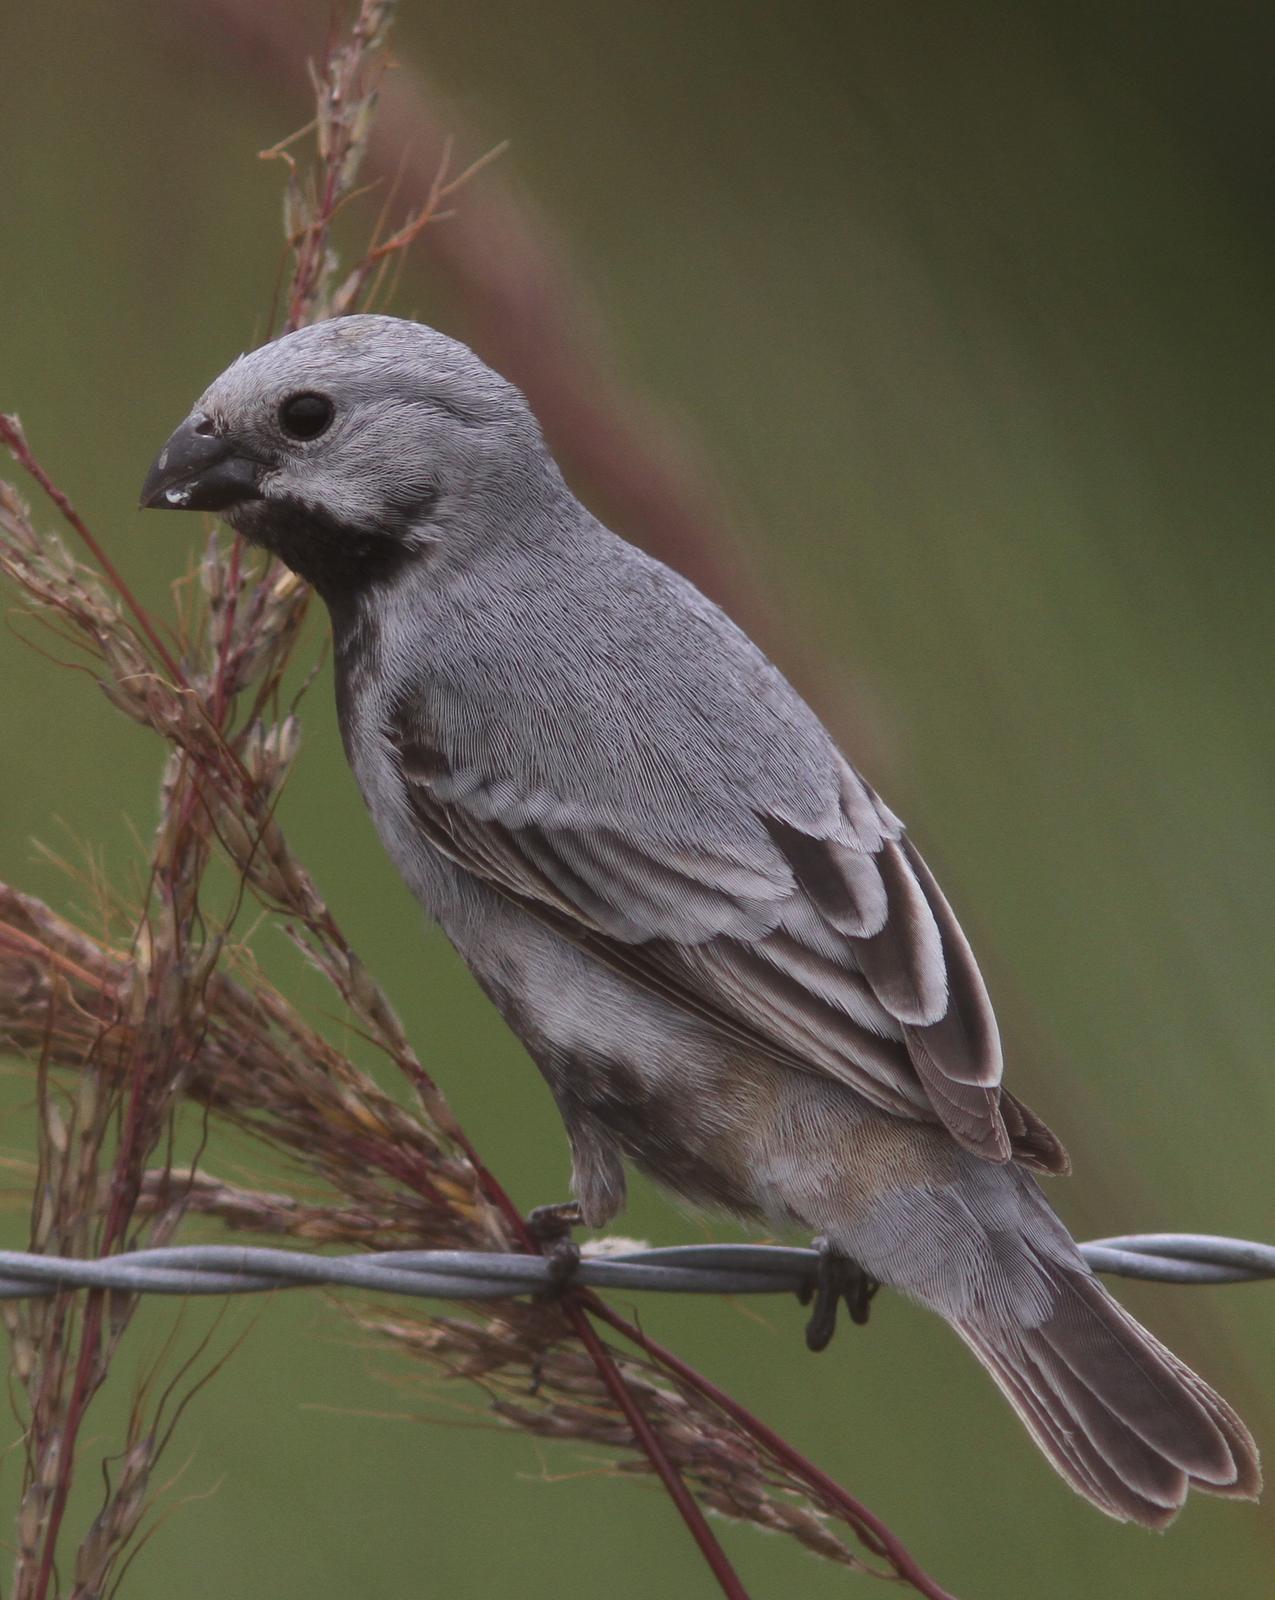 Black-bellied Seedeater Photo by Marcelo Padua